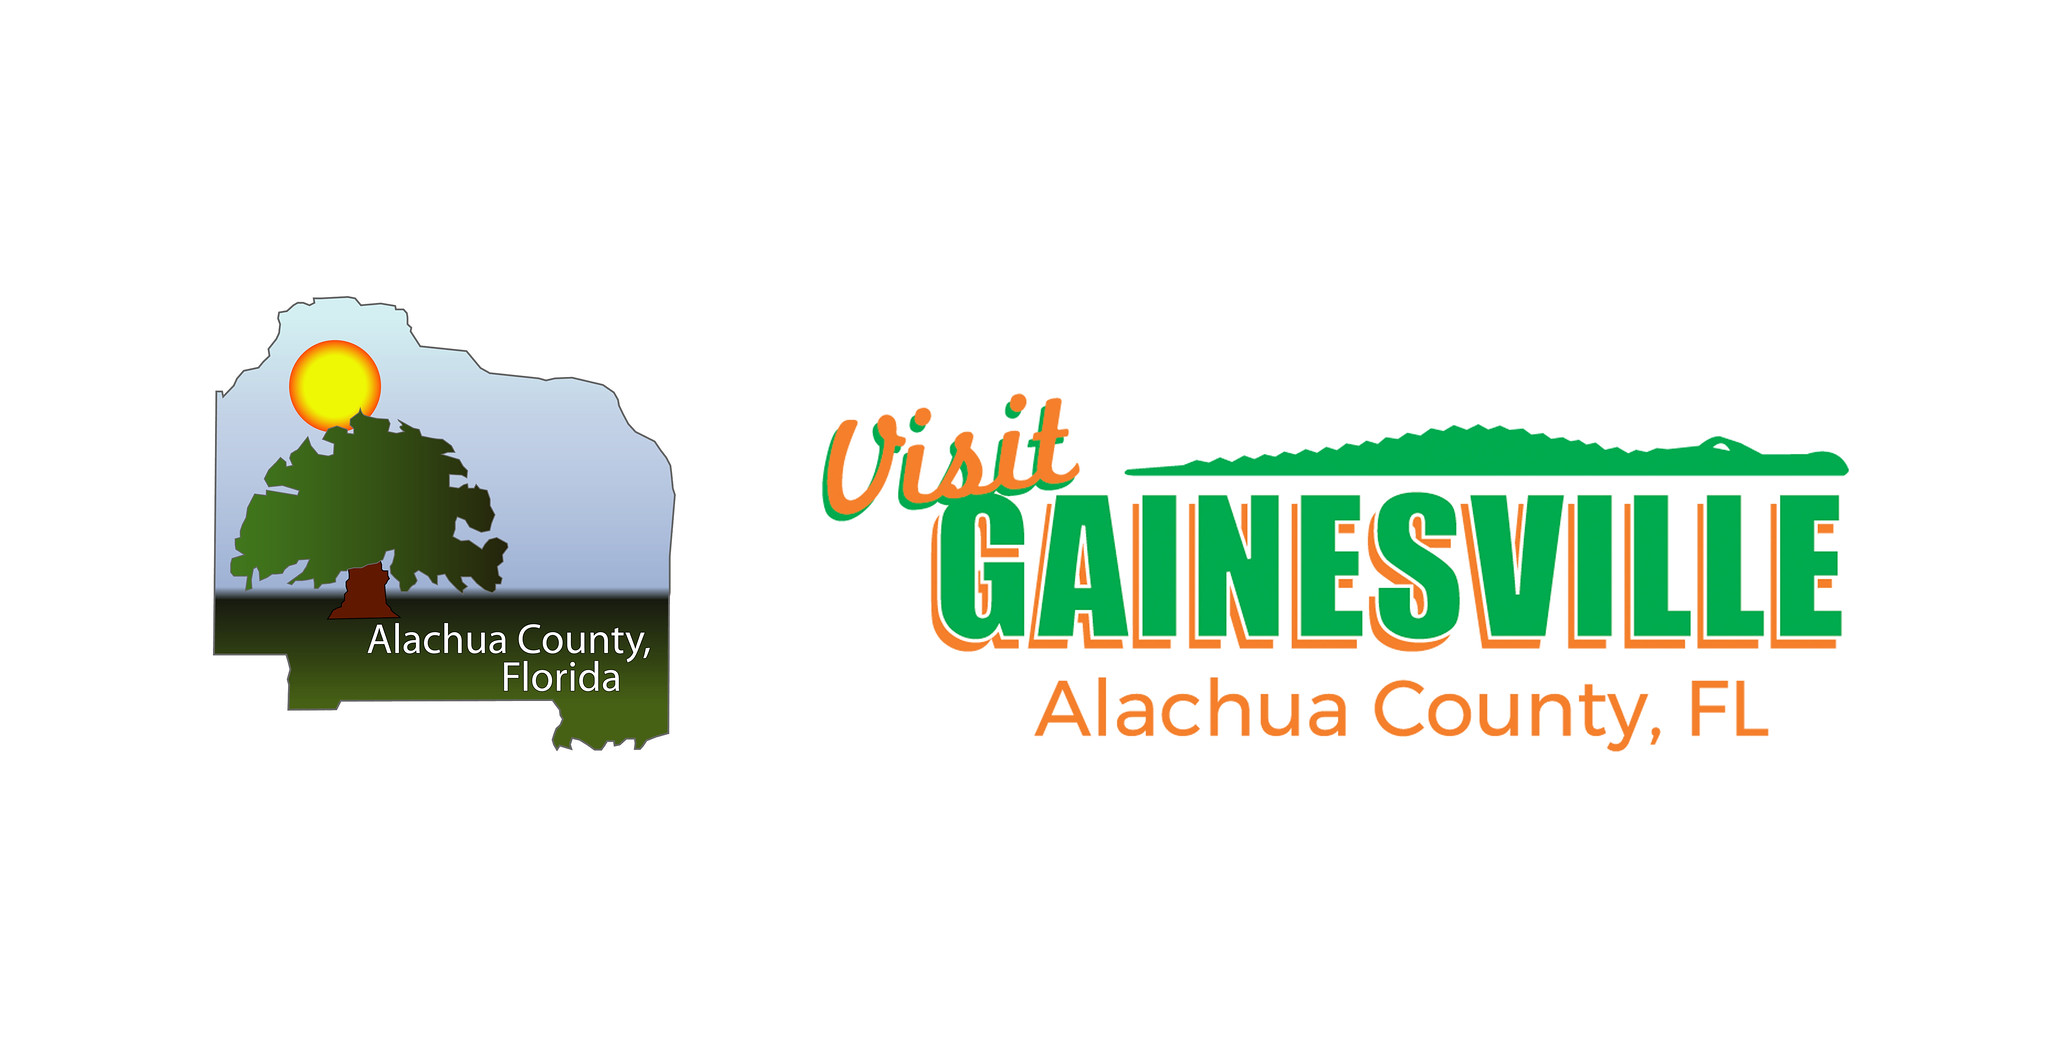 Visit Gainesville Alachua County